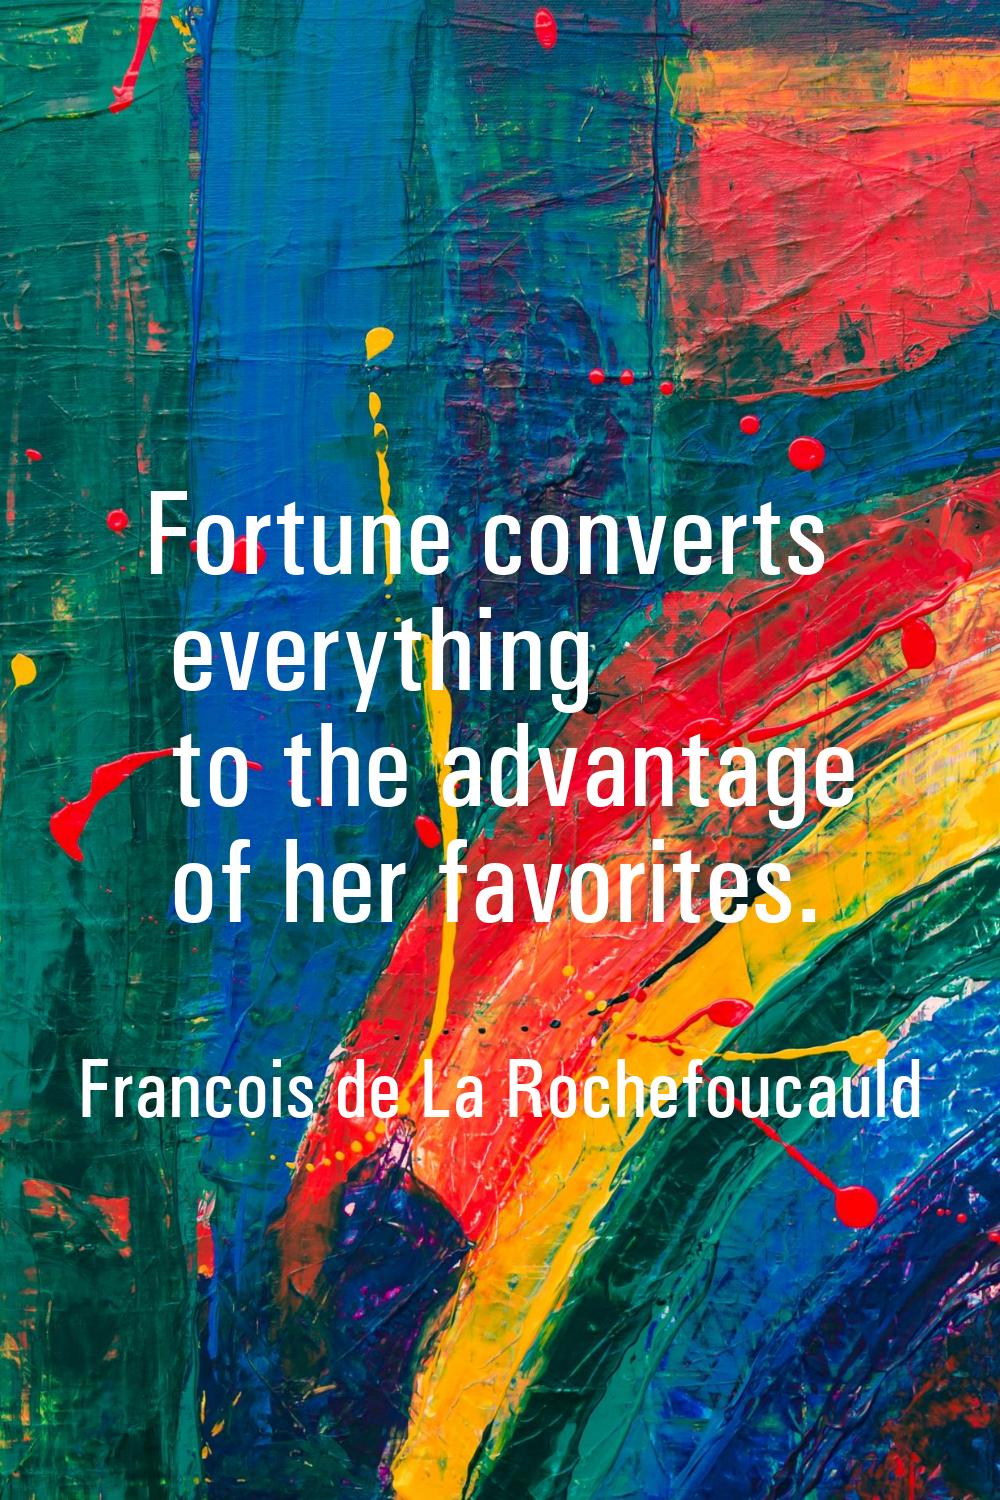 Fortune converts everything to the advantage of her favorites.